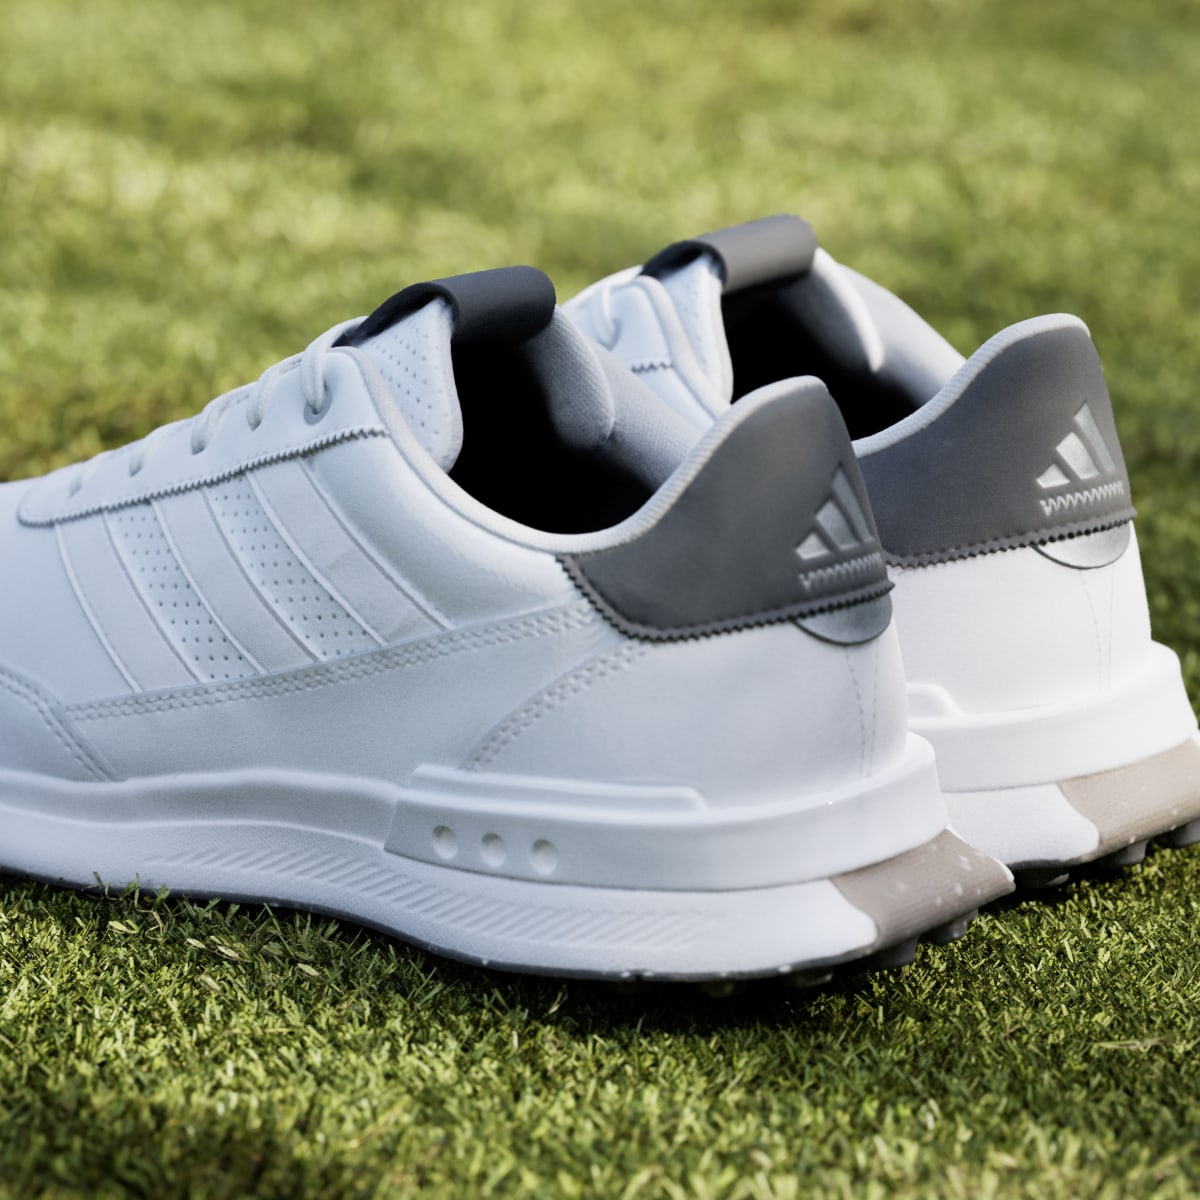 Adidas S2G Spikeless Leather 24 Golf Shoes. 9